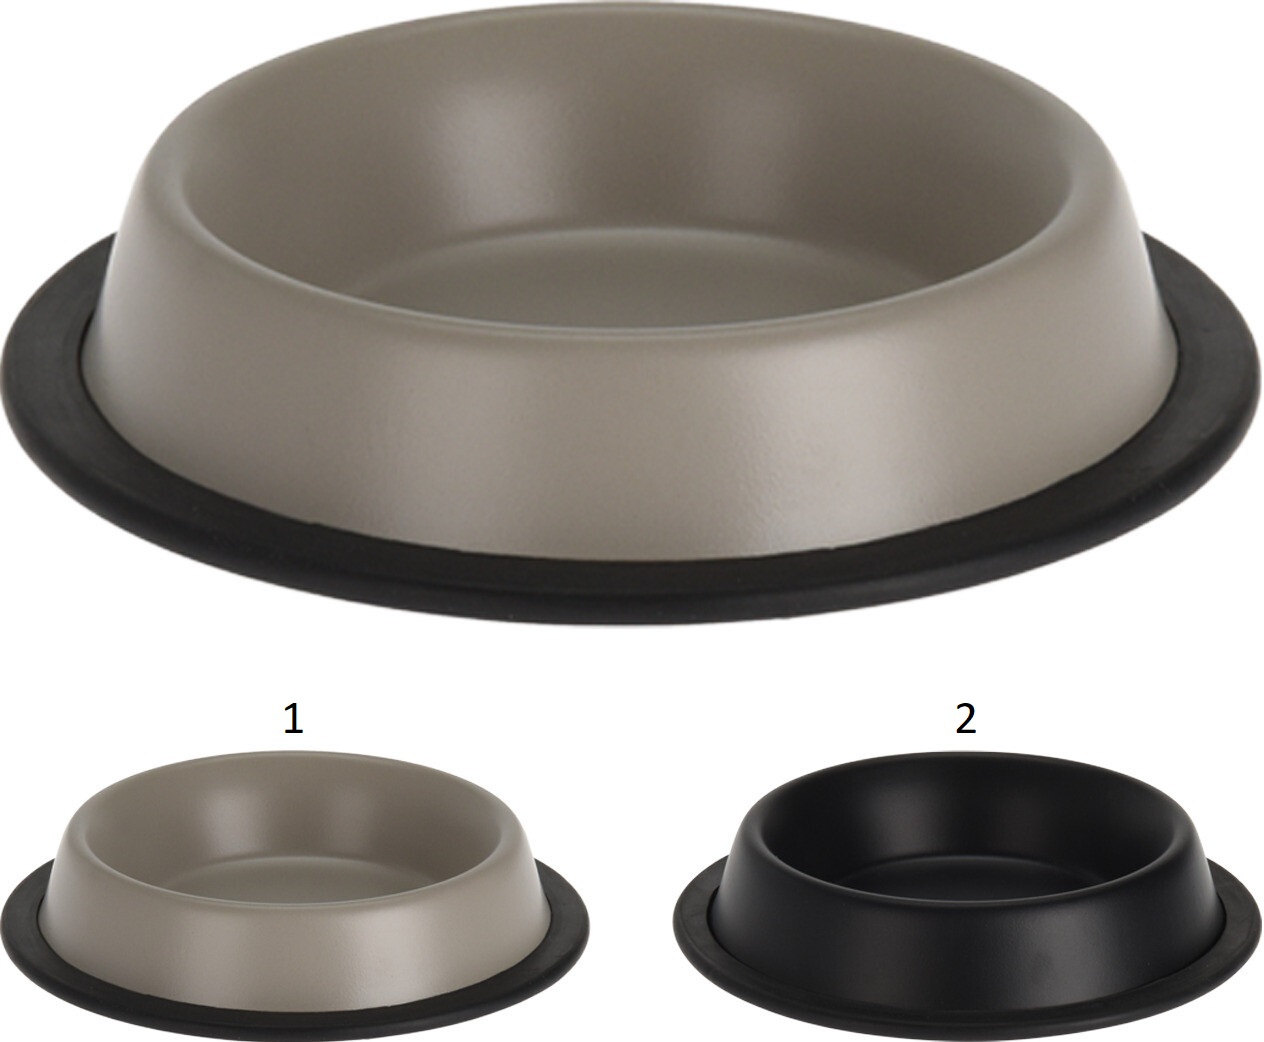 DOG BOWL STAINLESS STEEL 15CM 2 ASSORTED COLORS